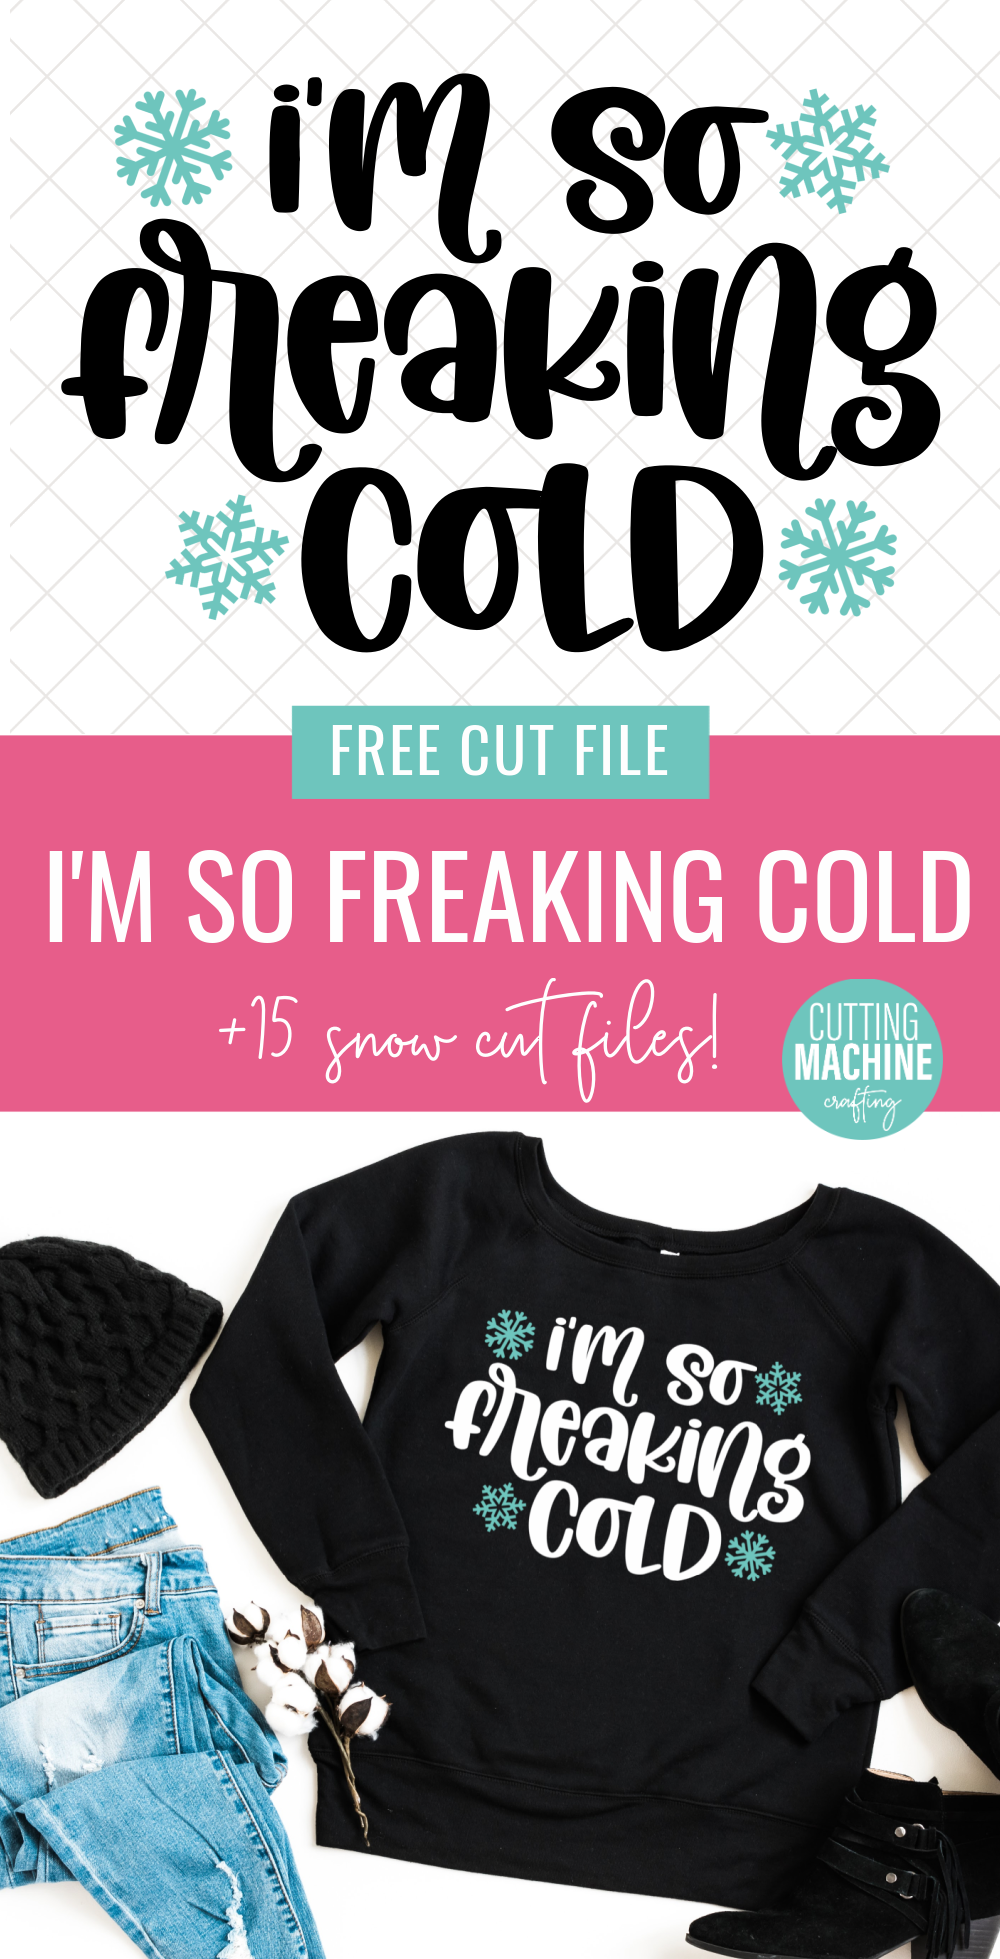 Are you always cold? Download a free I'm So Freaking Cold SVG that's perfect for winter crafting plus 15 free snow cut files that you can cut with your Cricut or Silhouette. Fun for sweatshirts, hoodies, mugs, handmade gifts and more! #SVG #CutFiles #FreeCutFiles #FreeSVG #Snow #WinterCrafts #CricutMade #CricutCreated